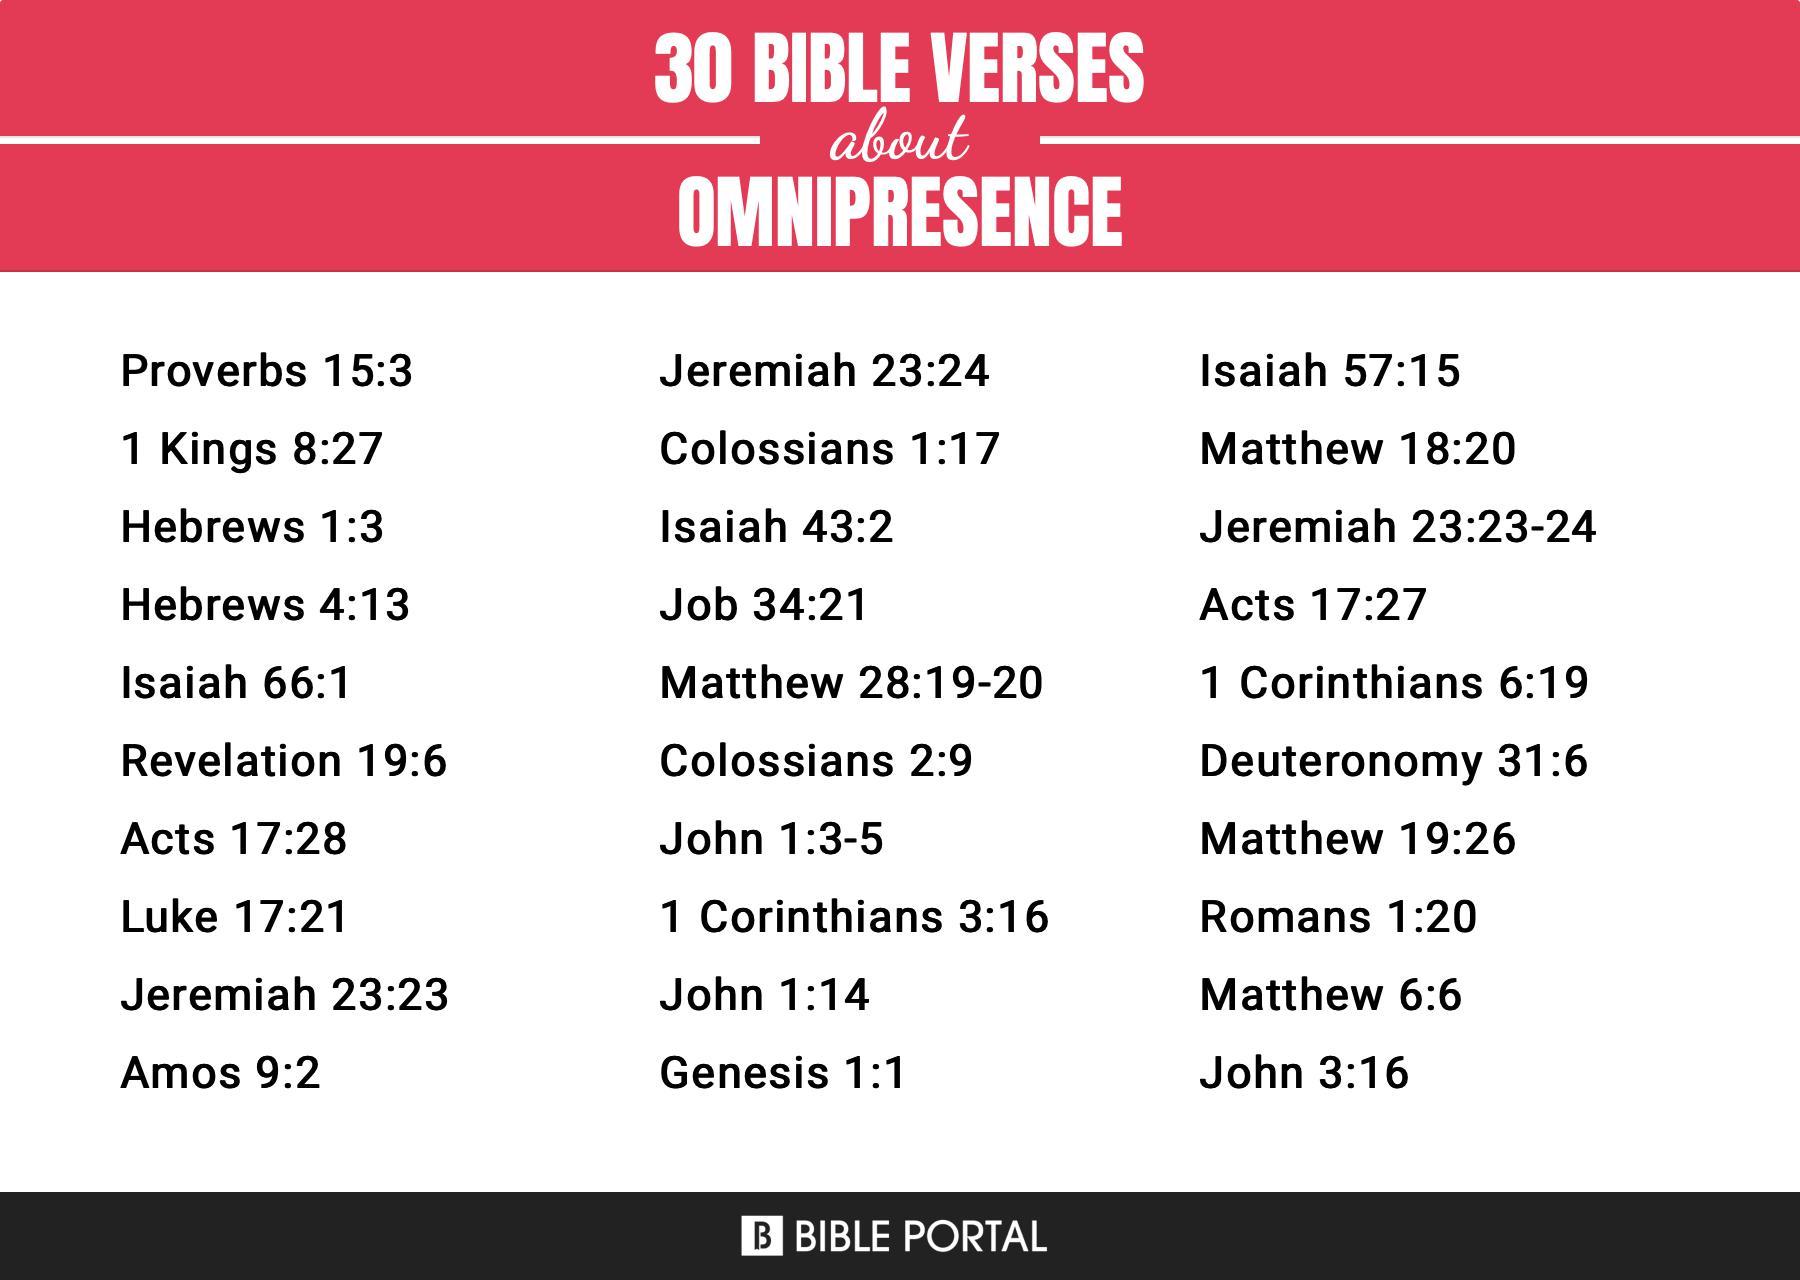 What Does the Bible Say about Omnipresence?